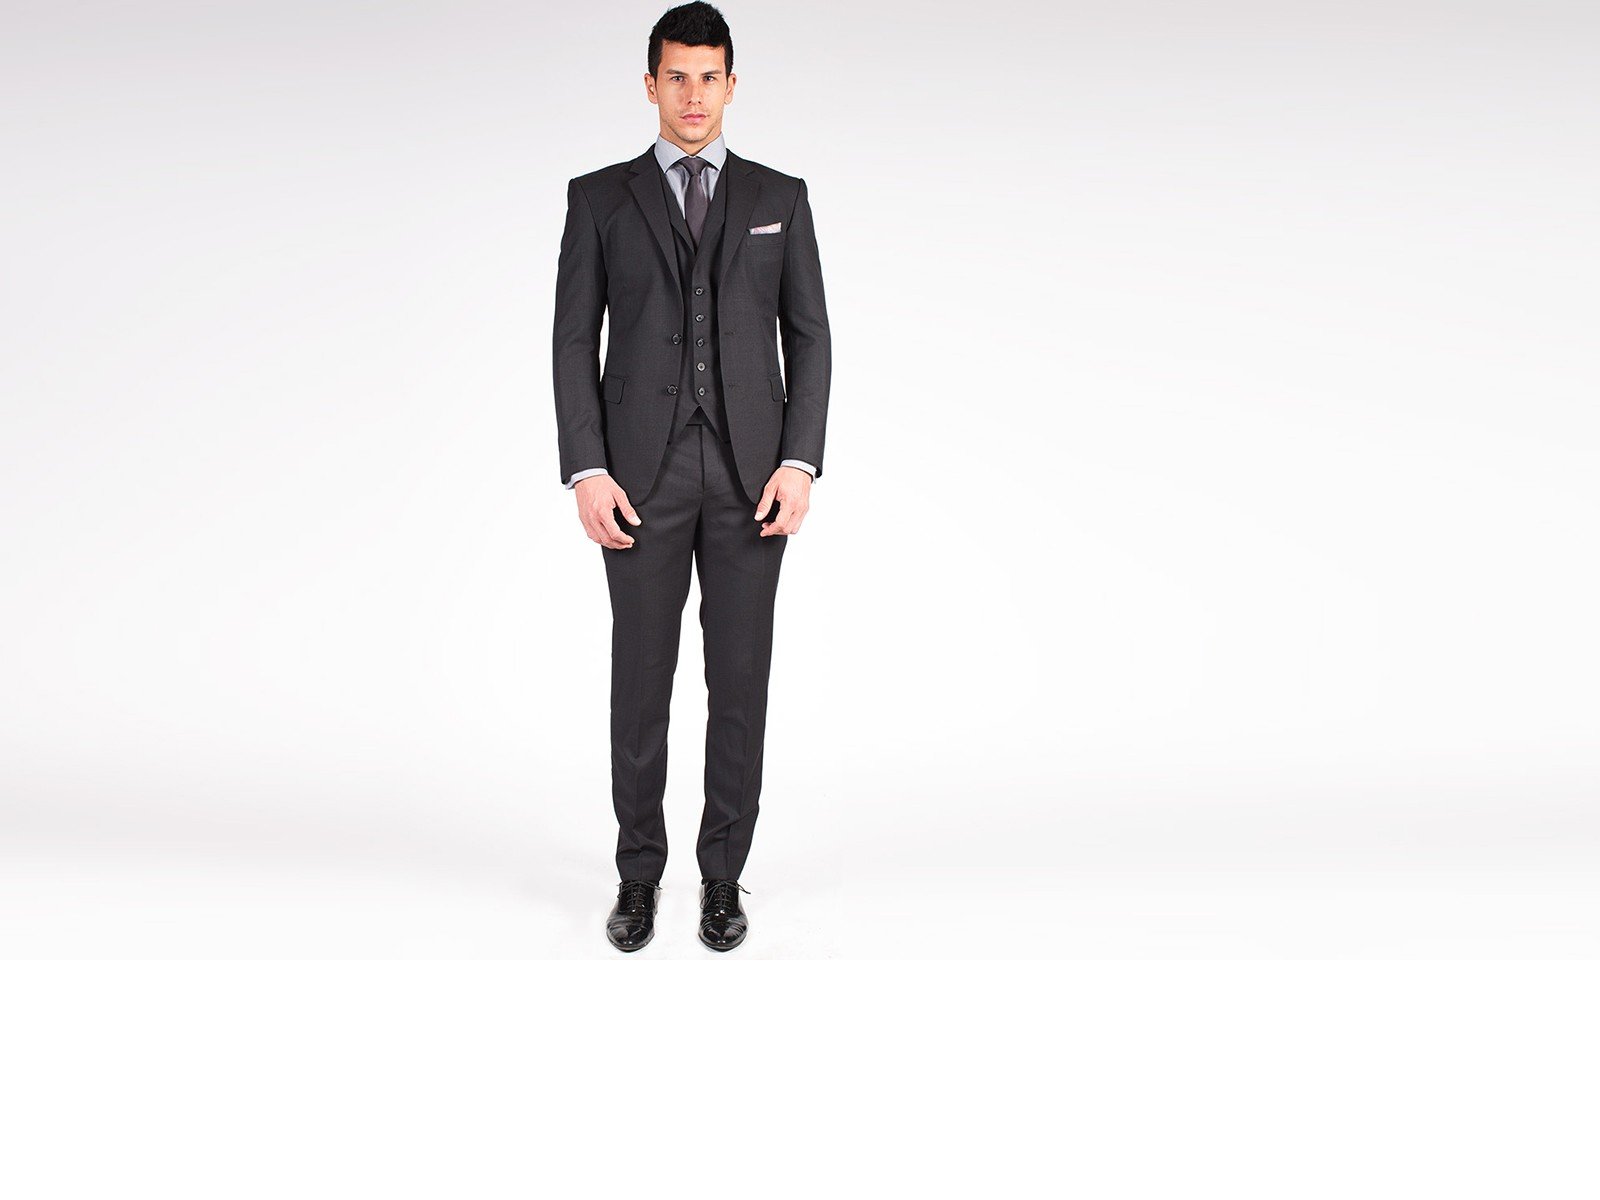 The Brody - Charcoal Grey 3 Piece Custom Suit